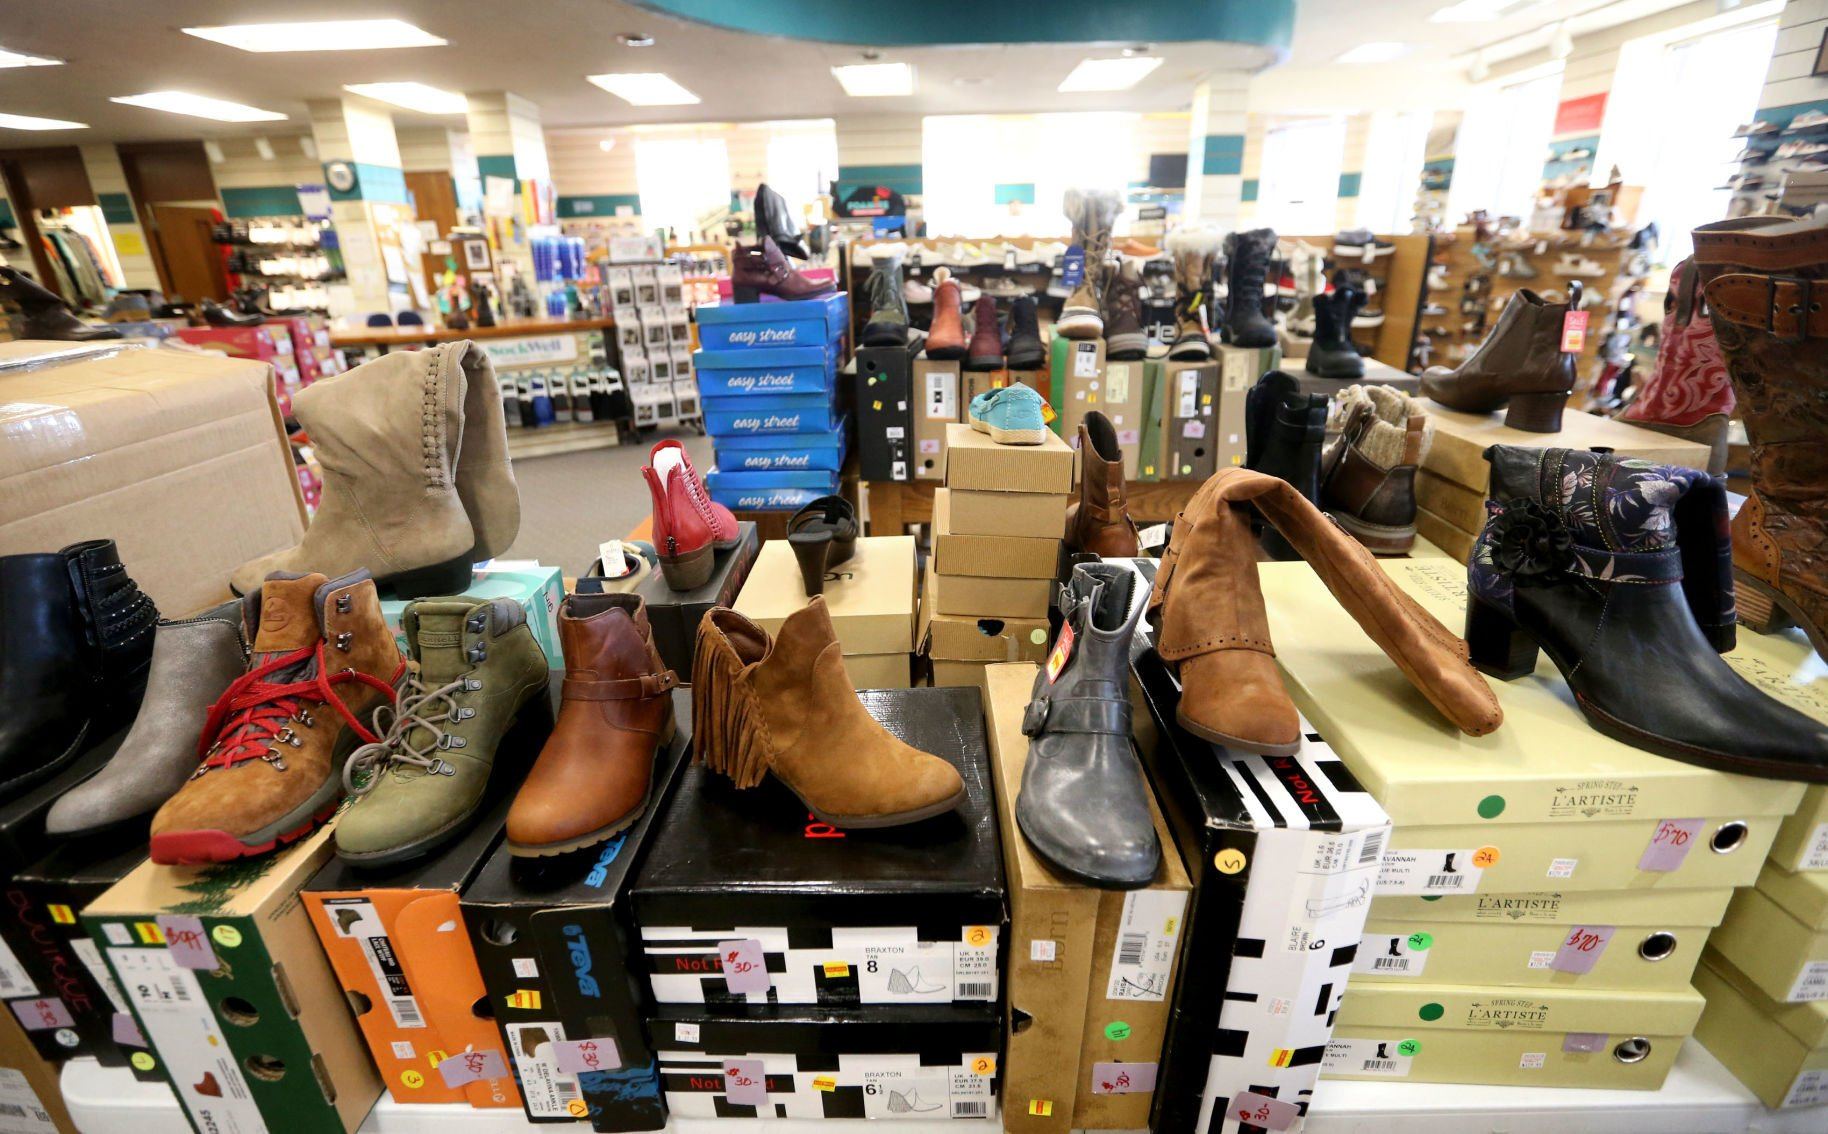 A wide range of footwear can be found at Cruisin’ Kids/Walker’s Clothing and Shoes in Lancaster, Wis. The store draws local residents, as well as customers from a “100-mile radius” that includes Dubuque.    PHOTO CREDIT: JESSICA REILLY